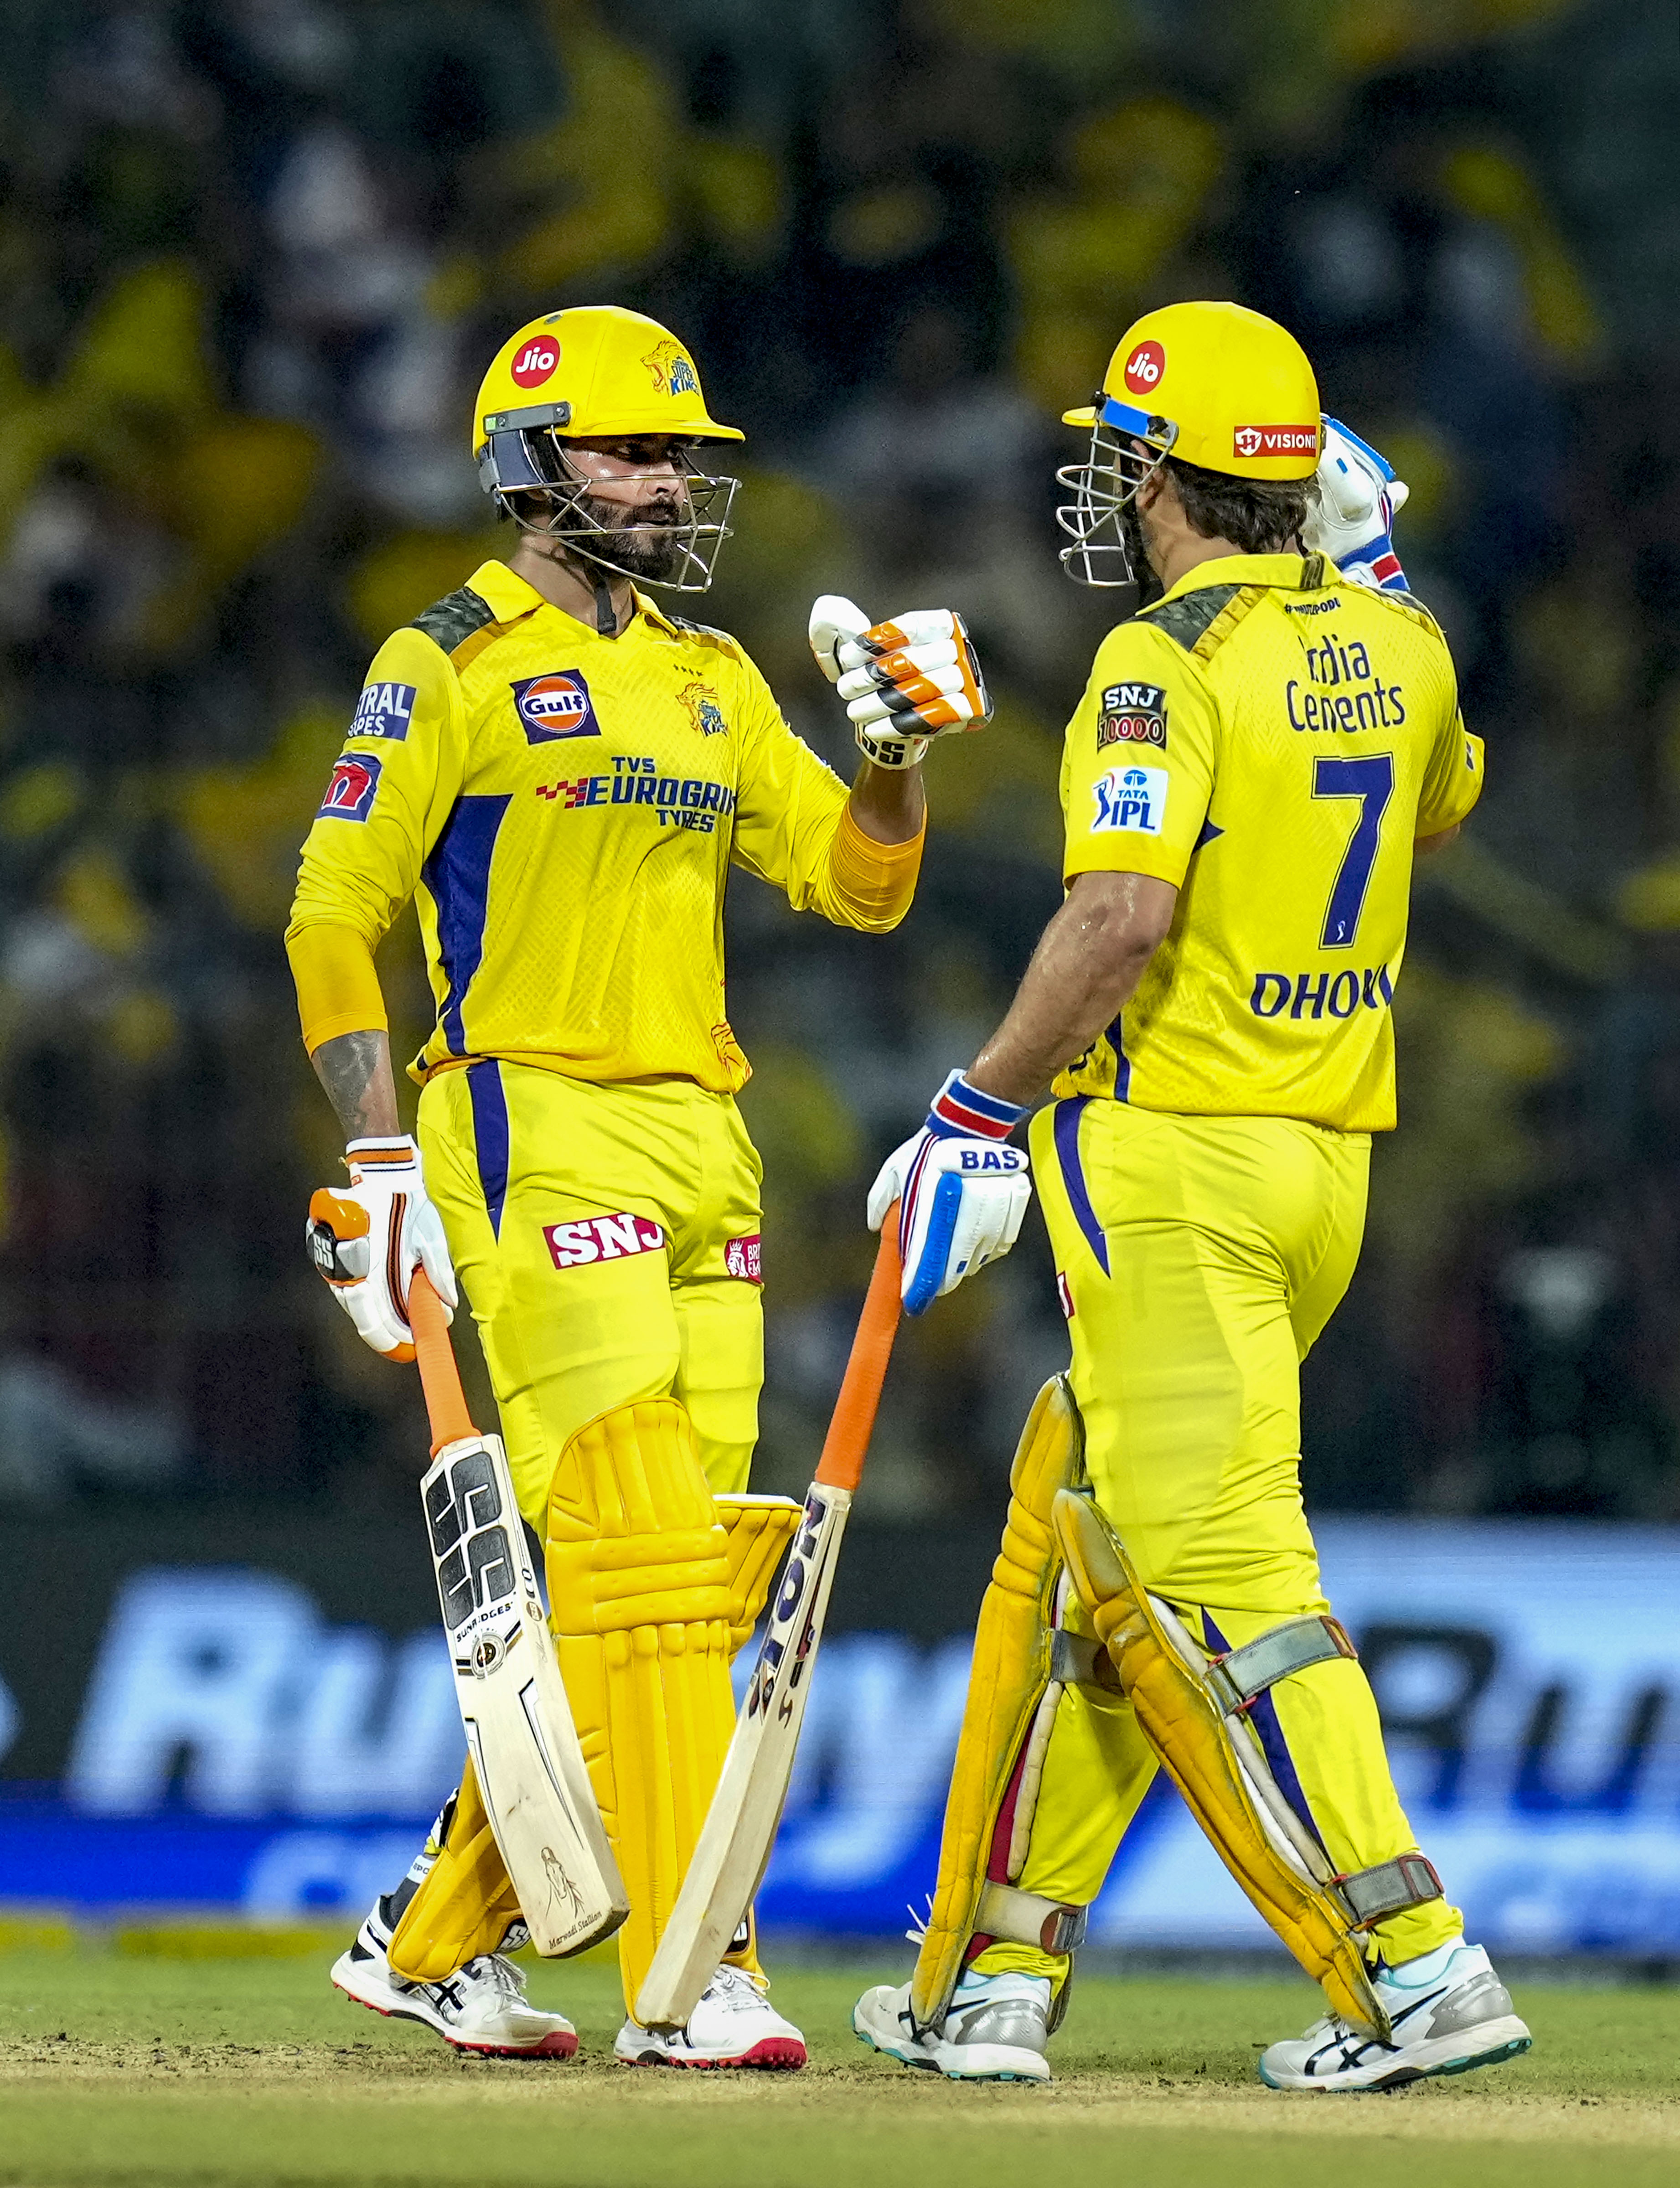 From MS Dhoni to Ravindra Jadeja, Most Player of the match awards for CSK in IPL history
